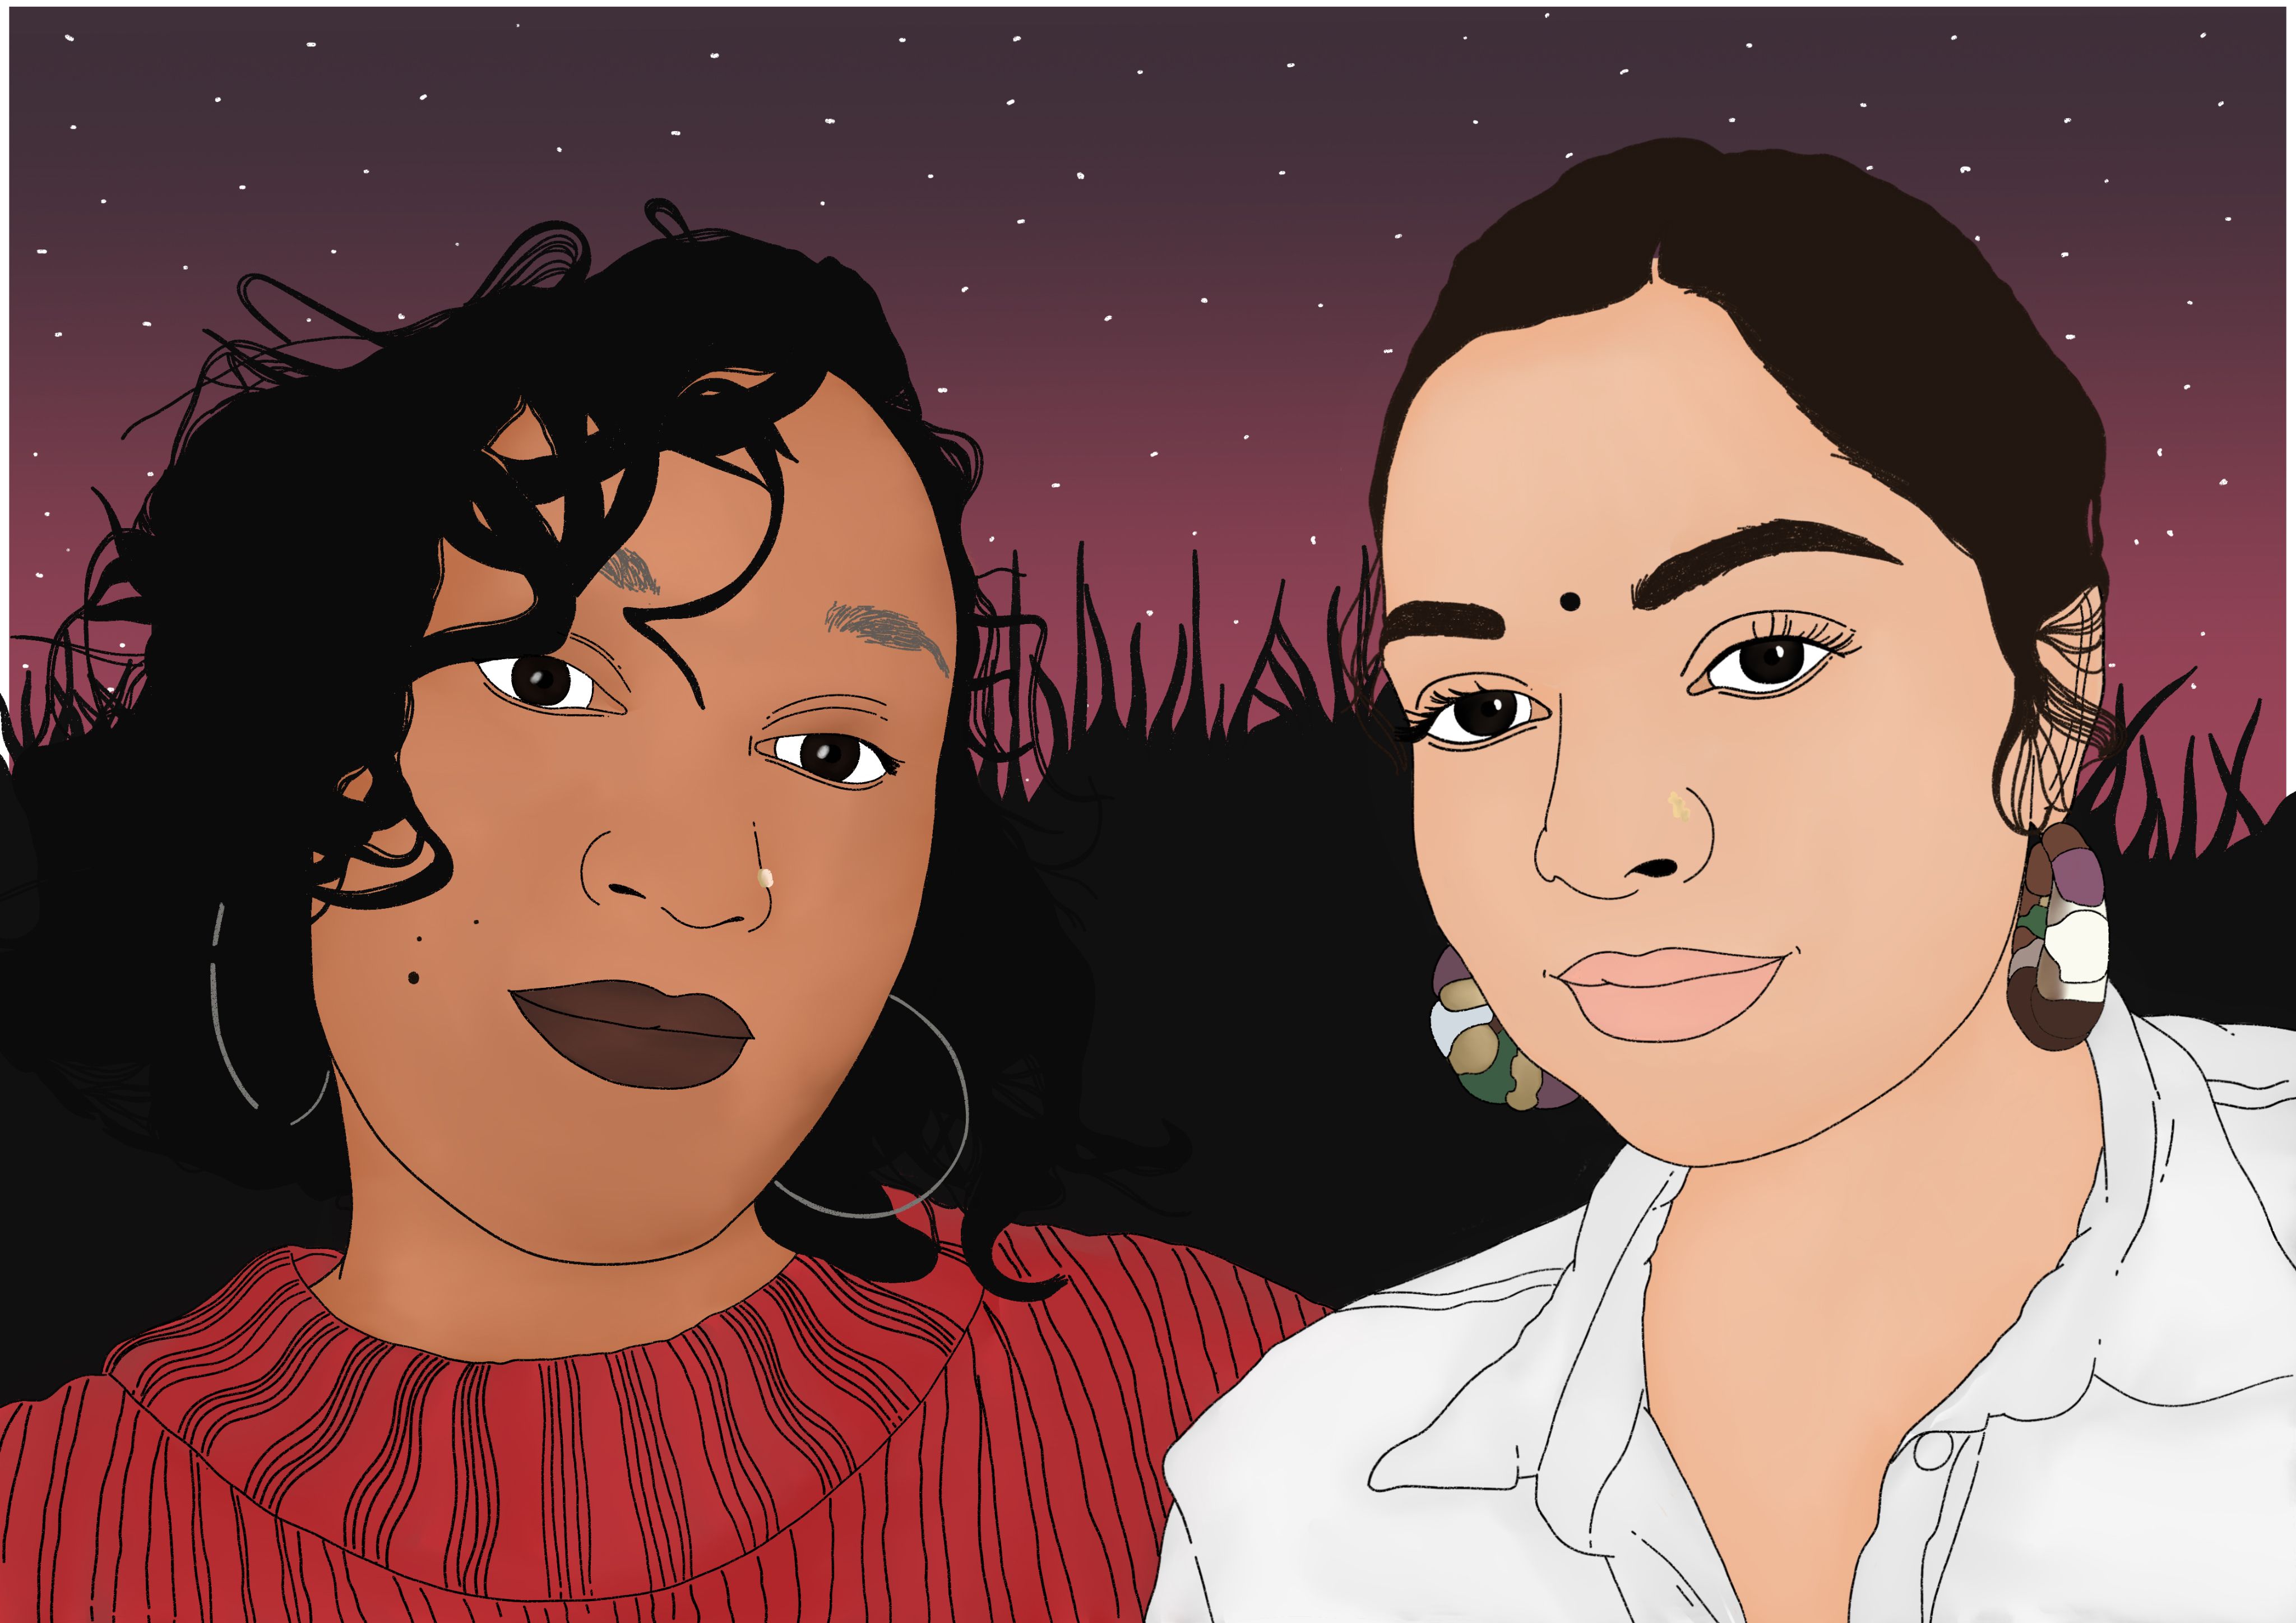 Illustration of Esha Pillay (left) and Quishile Charan (right). Esha is wearing an orange sweater with thin silver hoop earrings. Her hair is let down and curly. Quishile is wearing a white blouse with multi-coloured hoop earrings. Her hair is tied back in a bun. Behind them are sugarcane fields and a black-reddish-purple night sky with bright stars. 